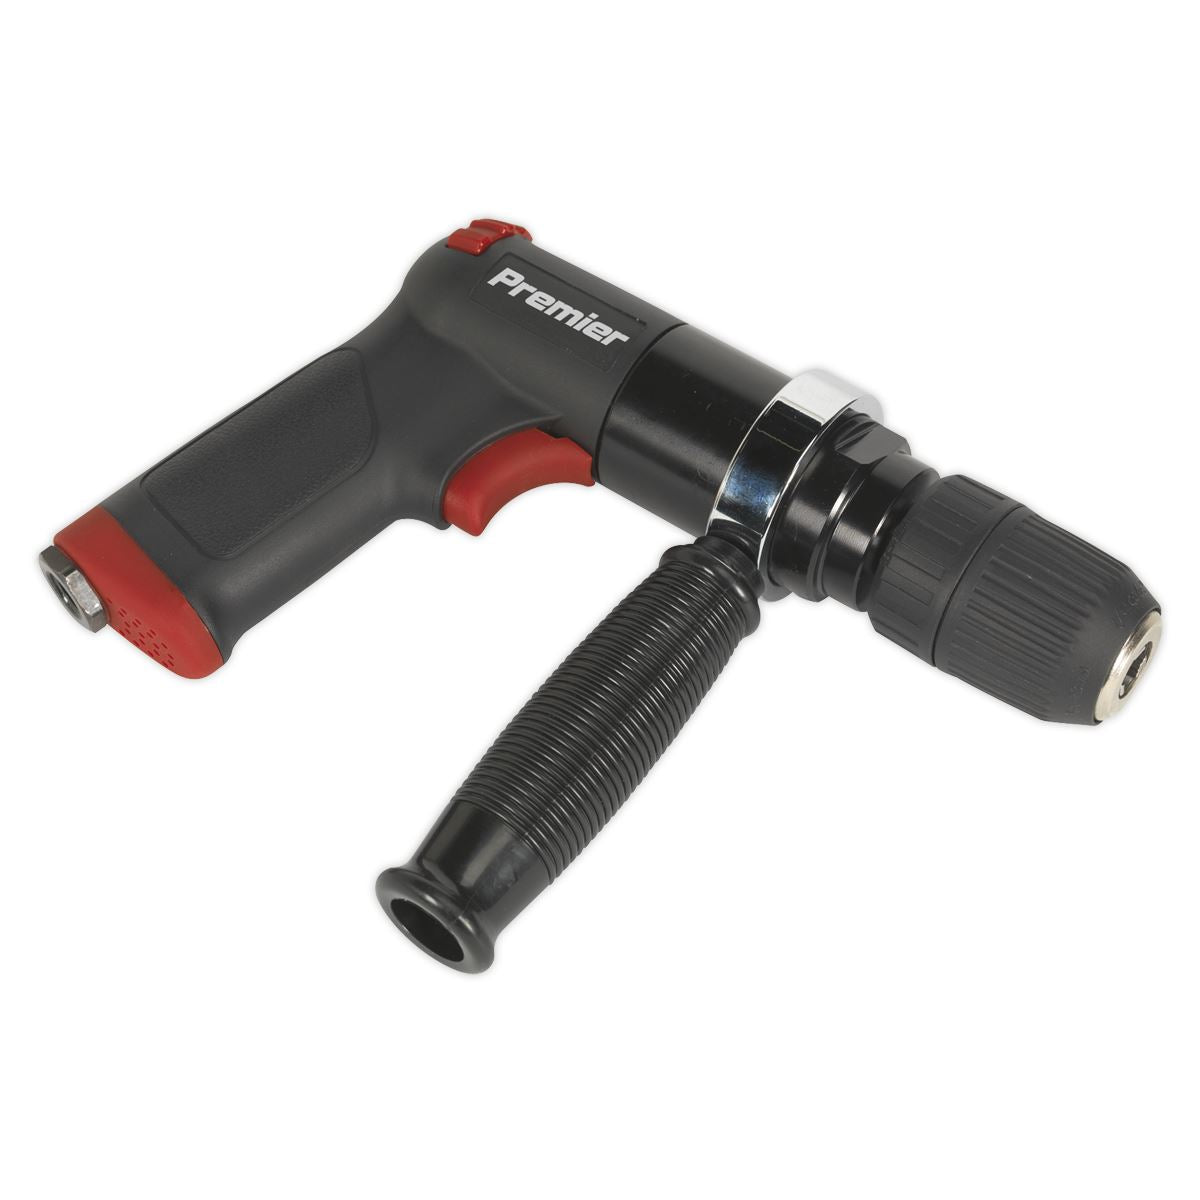 Sealey Premier Air Drill Ø13mm with Keyless Chuck Composite Reversible - Premier